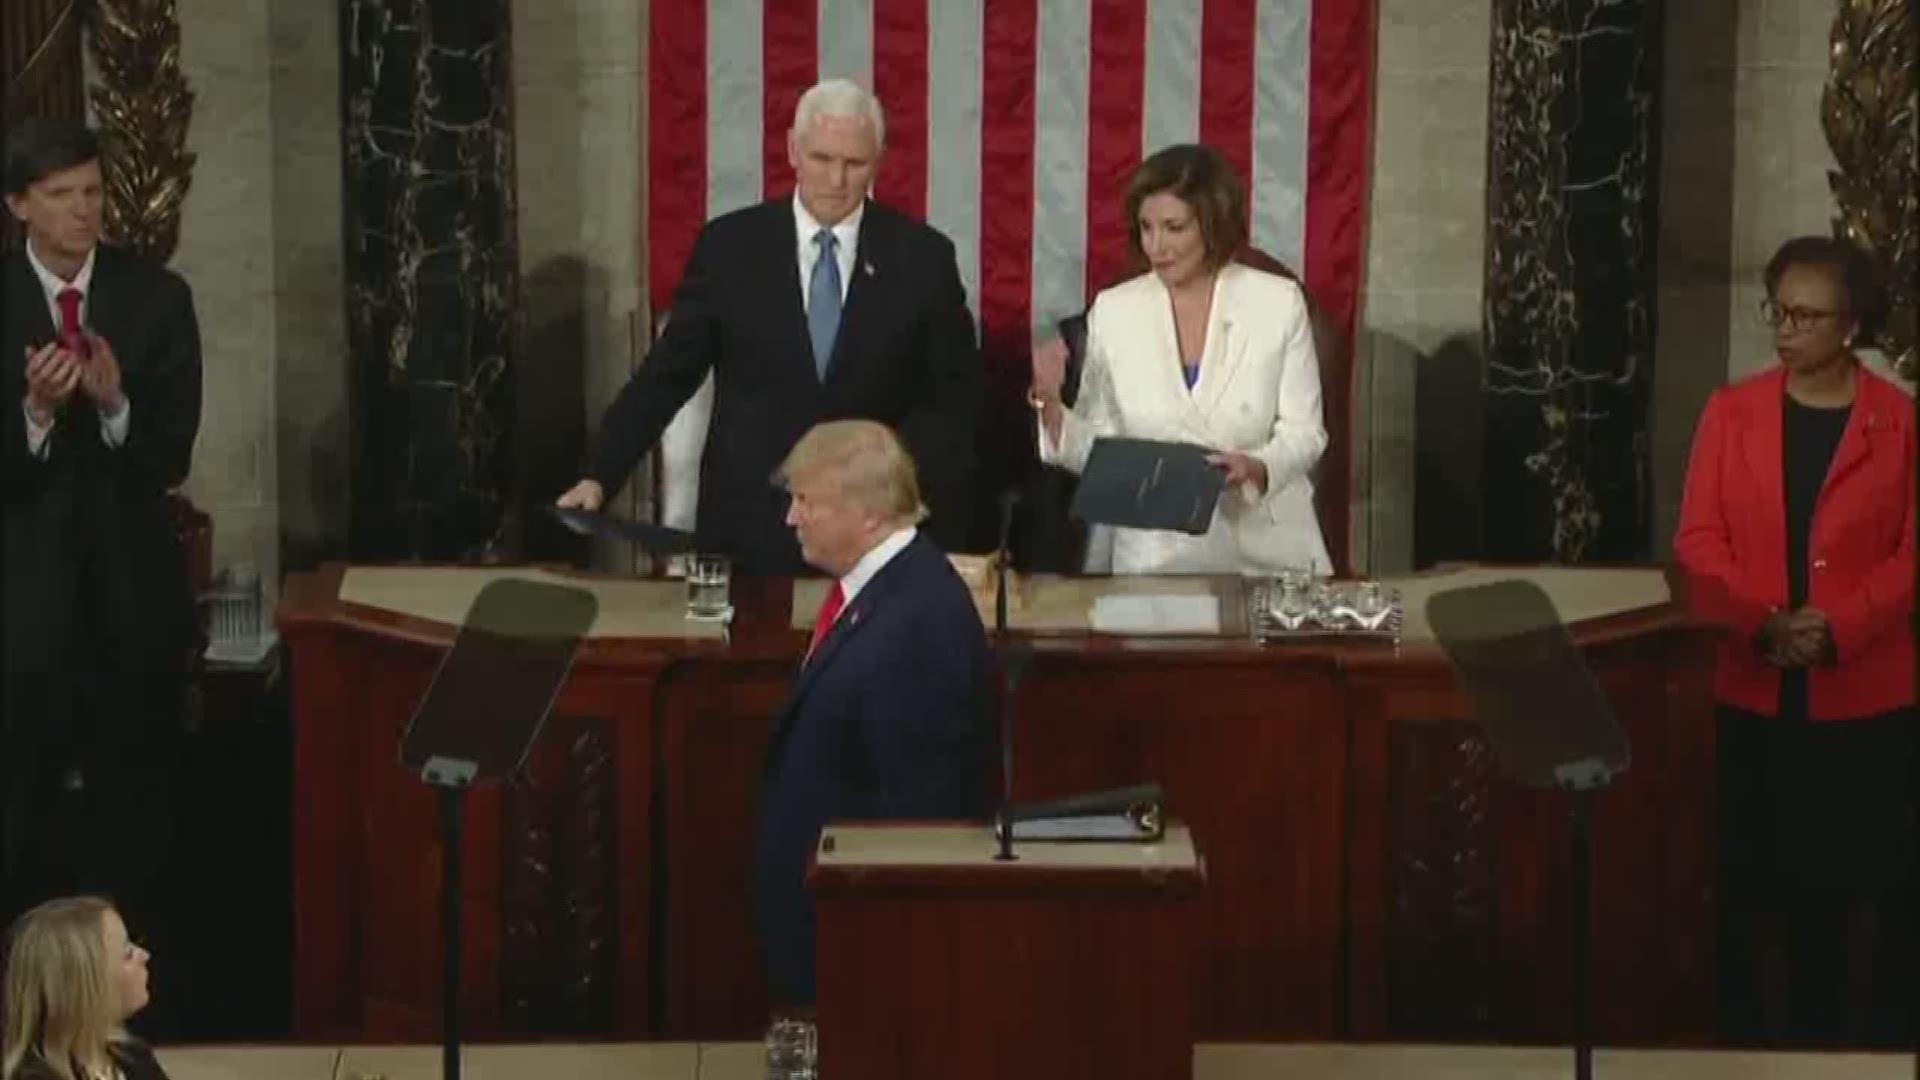 As President Donald Trump entered the House chamber to deliver his third State of the Union speech, he seems to avoid shaking Nancy Pelosi's hand.